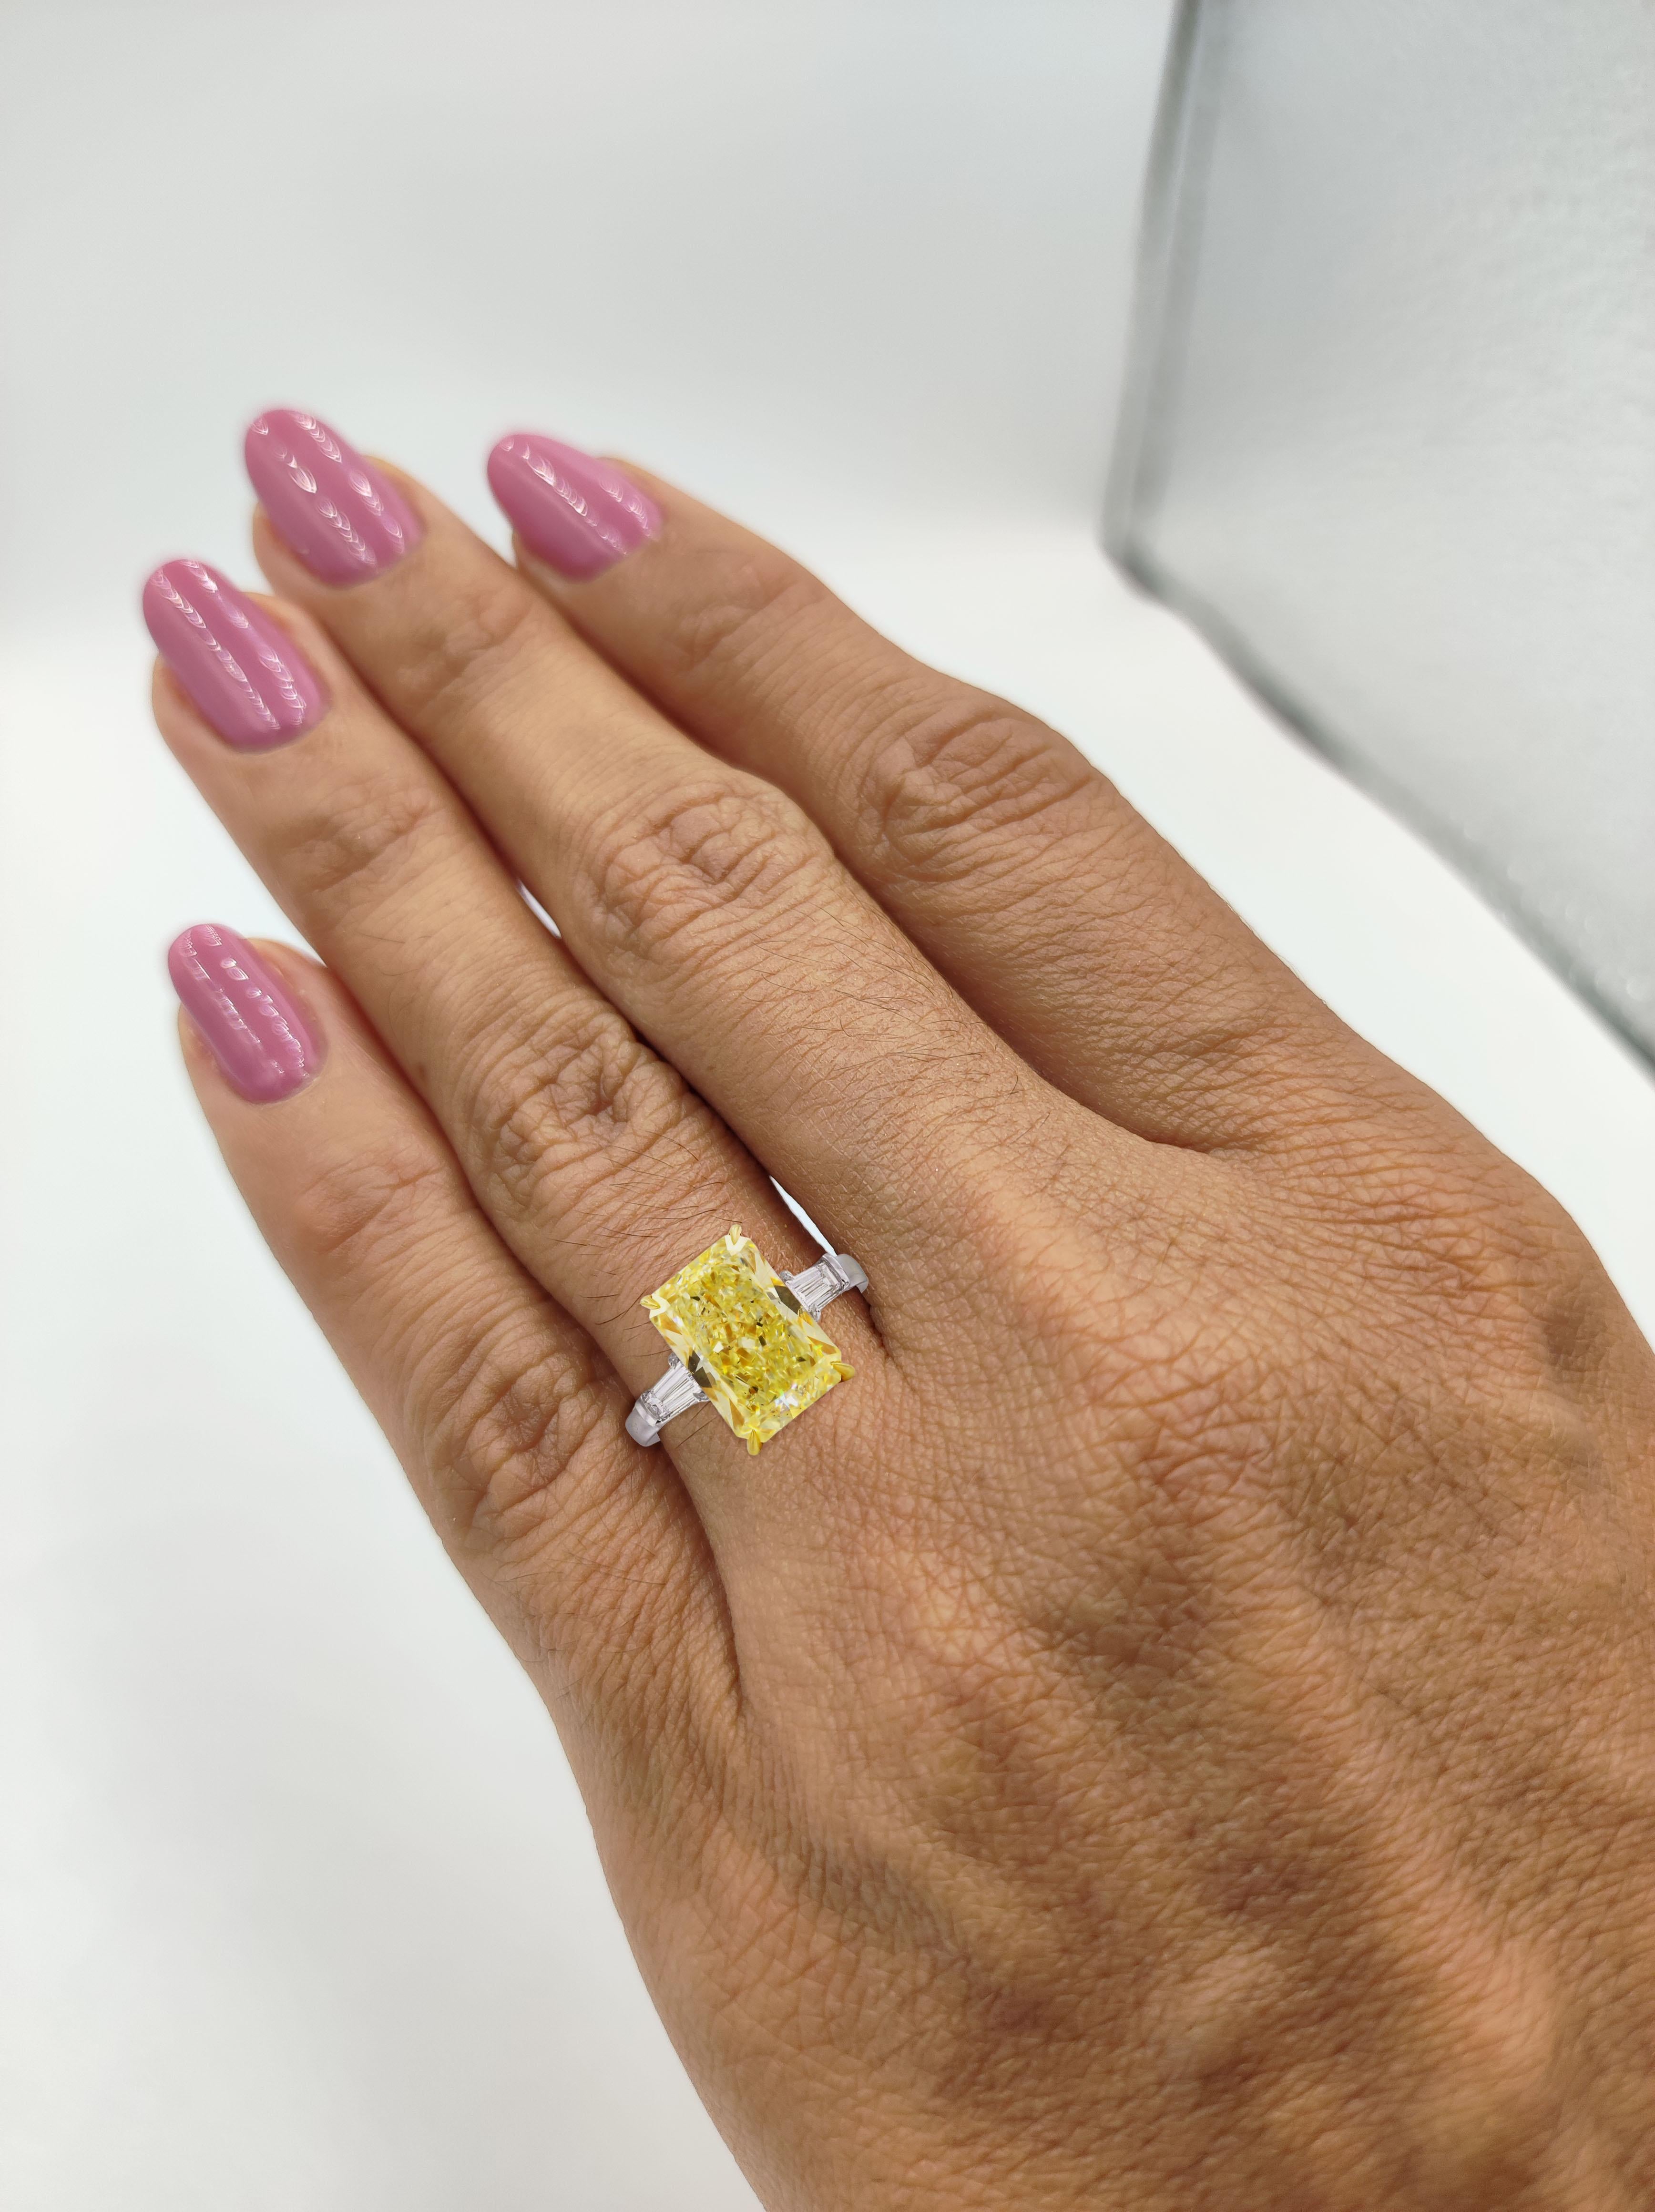 Magnificent radiant cut diamond ring is the Highlight of Antinori di Sanpietro ROMA Speechless 5 Carats Fancy Yellow Radiant Cut, Internally Flawless in clarity. Certified by GIA set with 1 Carats of two beautiful tapered baguette diamonds set in